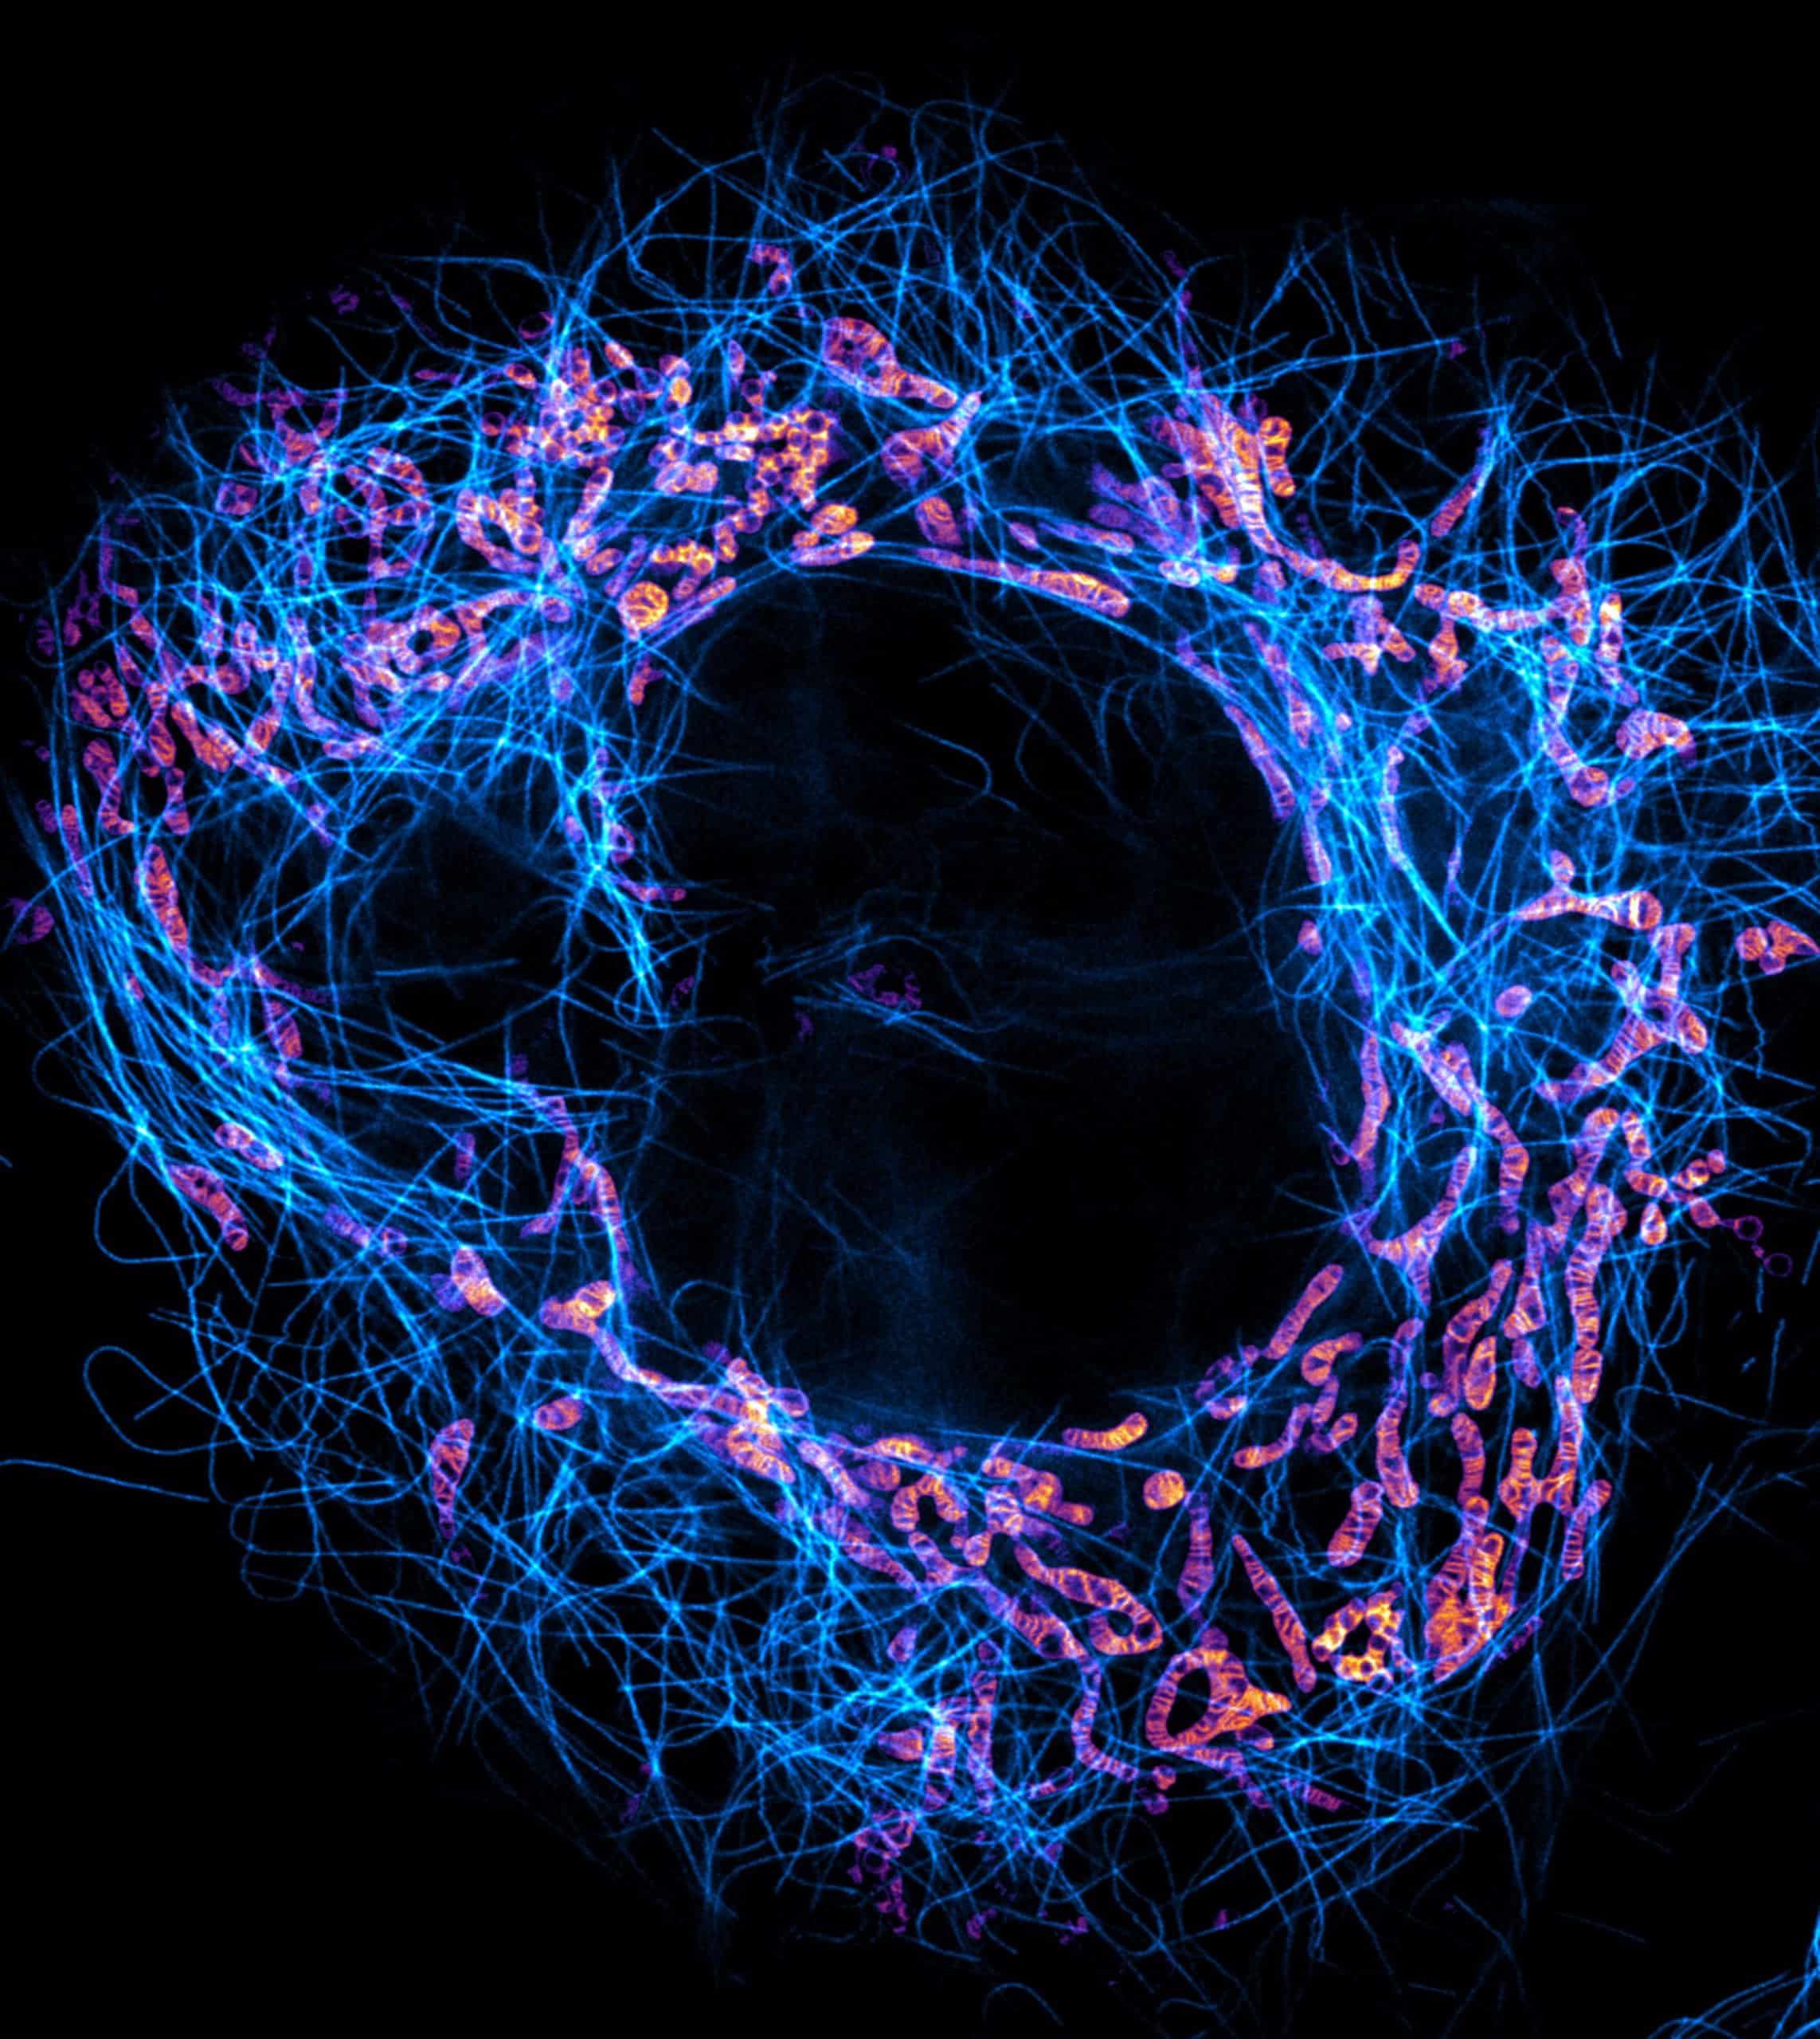 Microtubules and mitochondria imaged by Till Stephan using STED